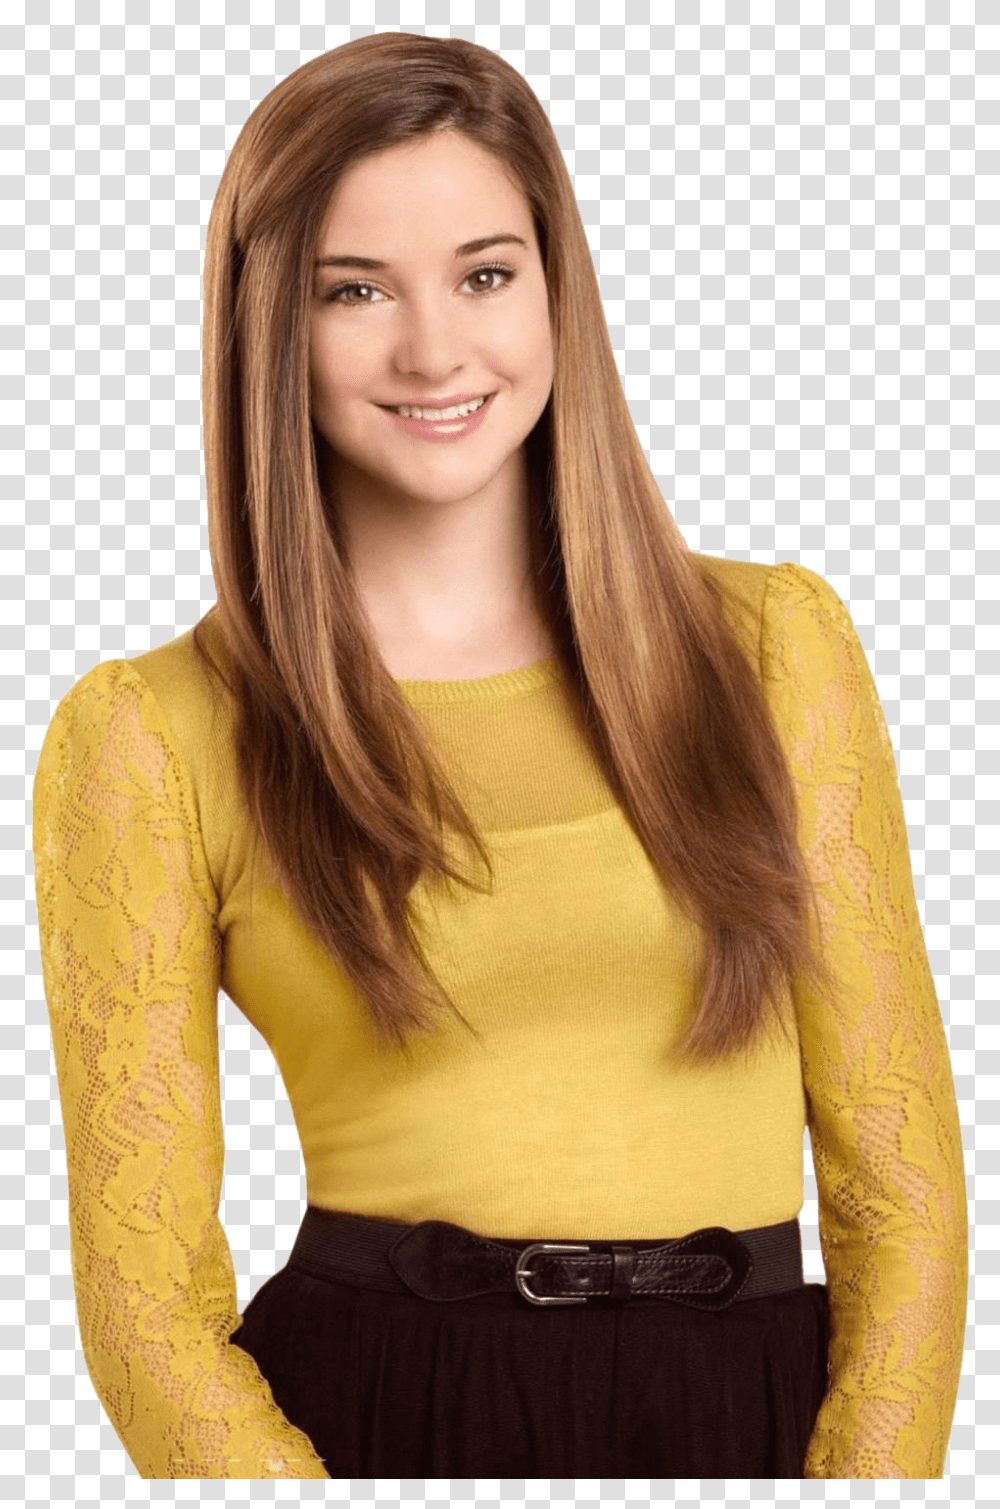 Actress Shailene Woodley Download Image Shailene Woodley On Beach, Hair, Apparel, Person Transparent Png